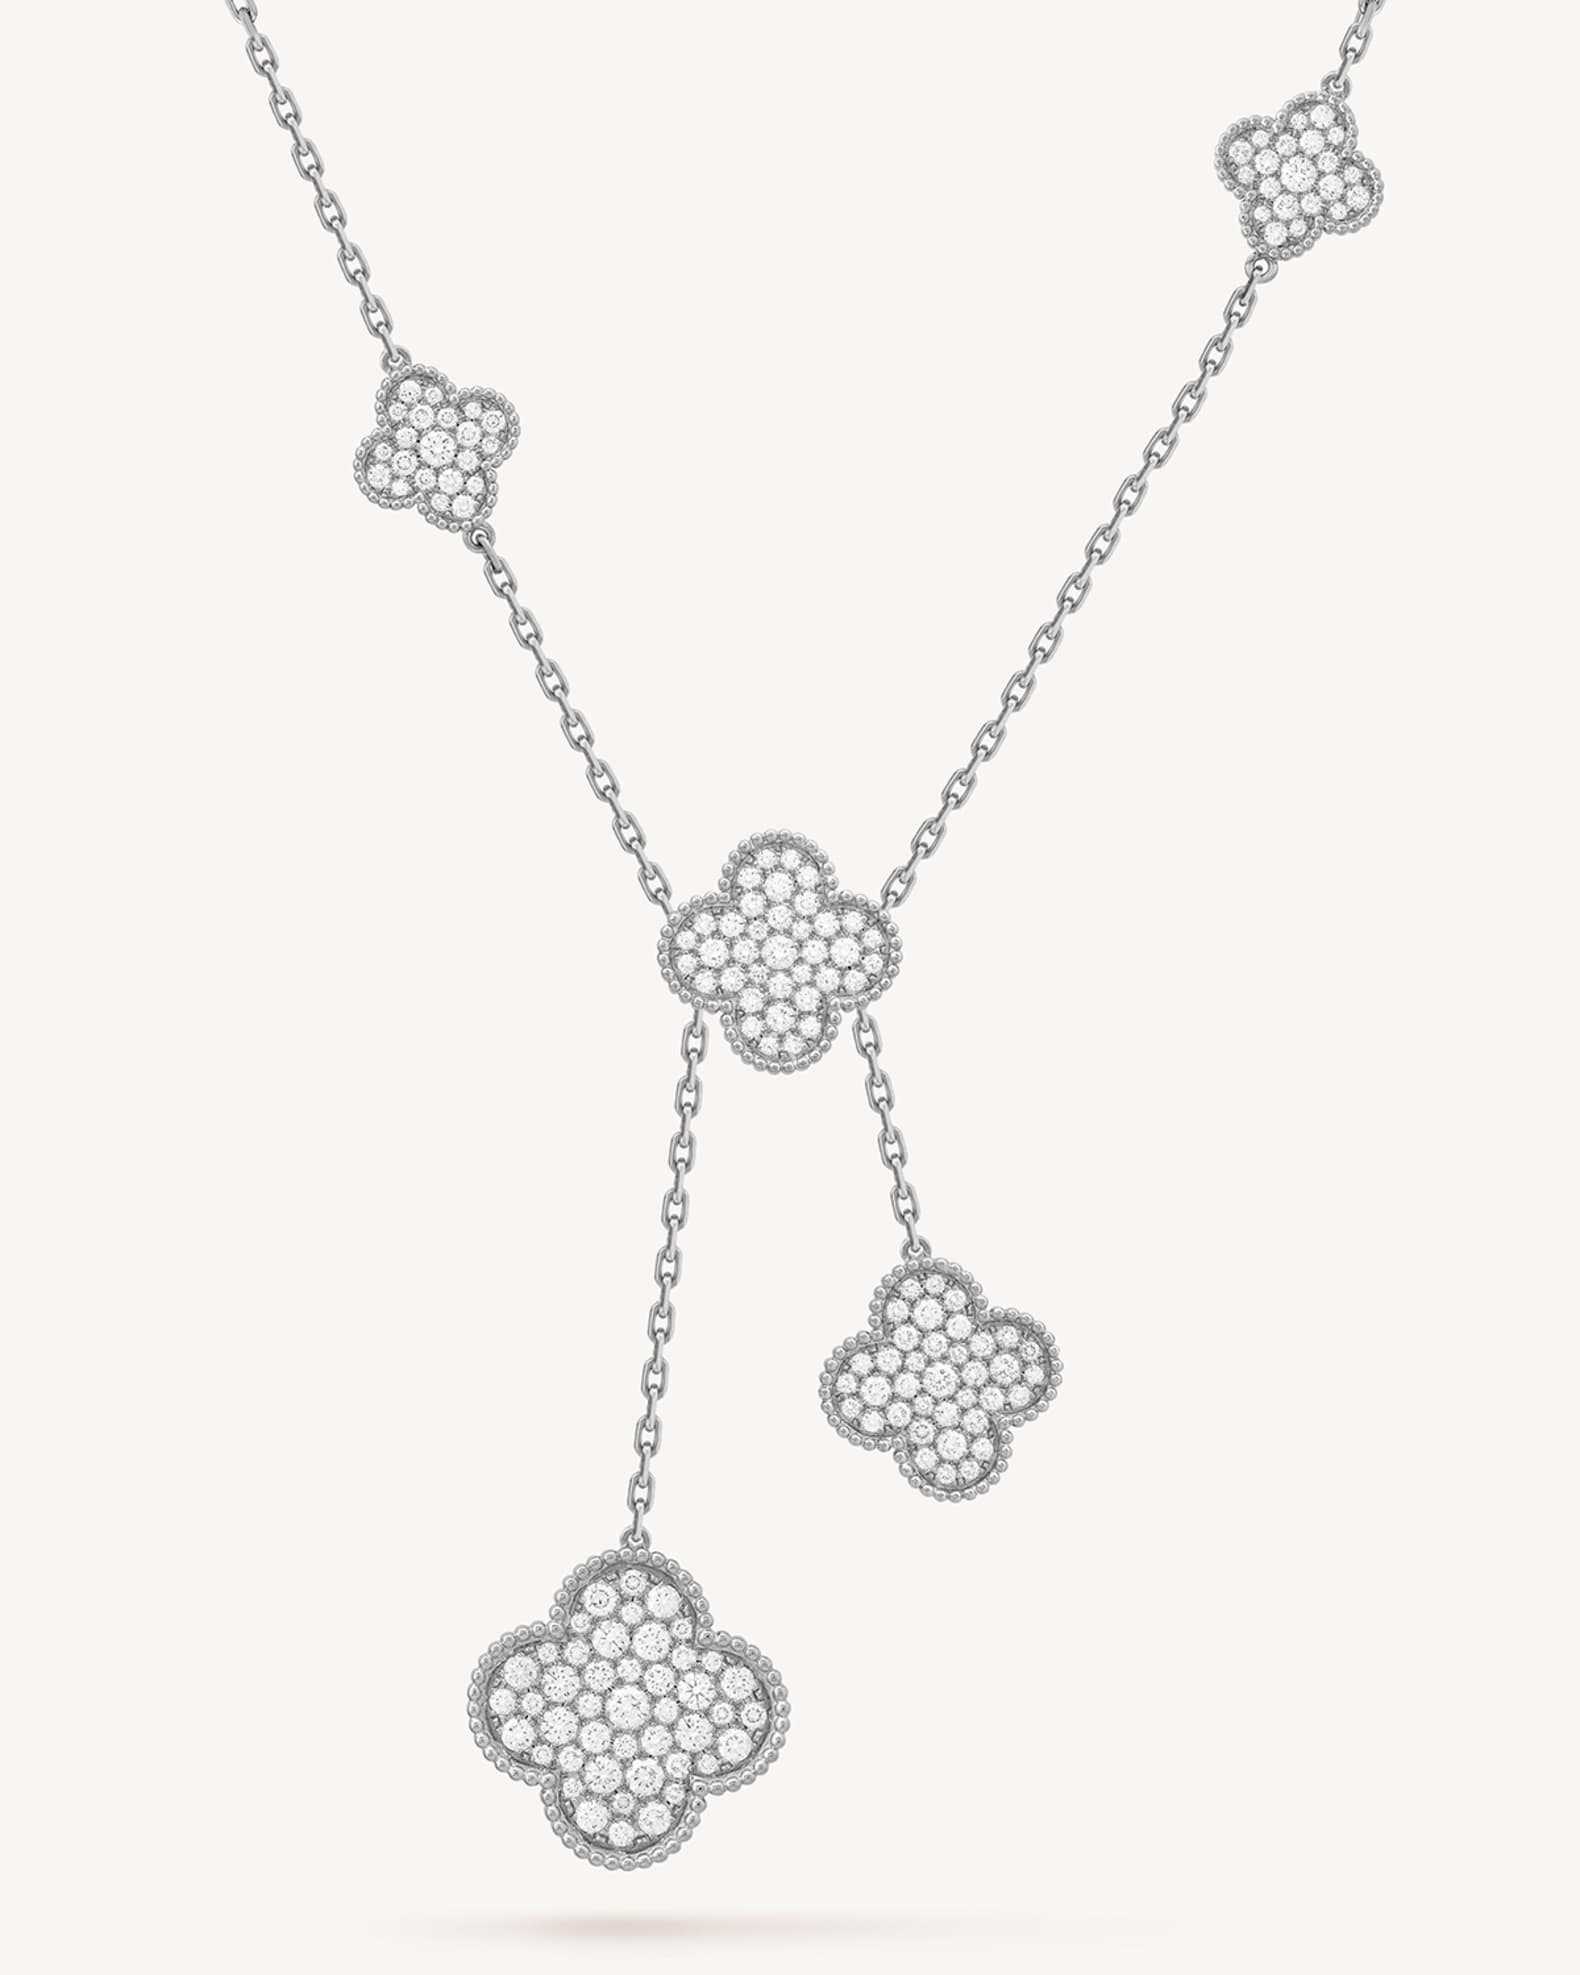 Van Cleef & Arpels Magic Alhambra Necklace with 6 Motifs — UFO No More